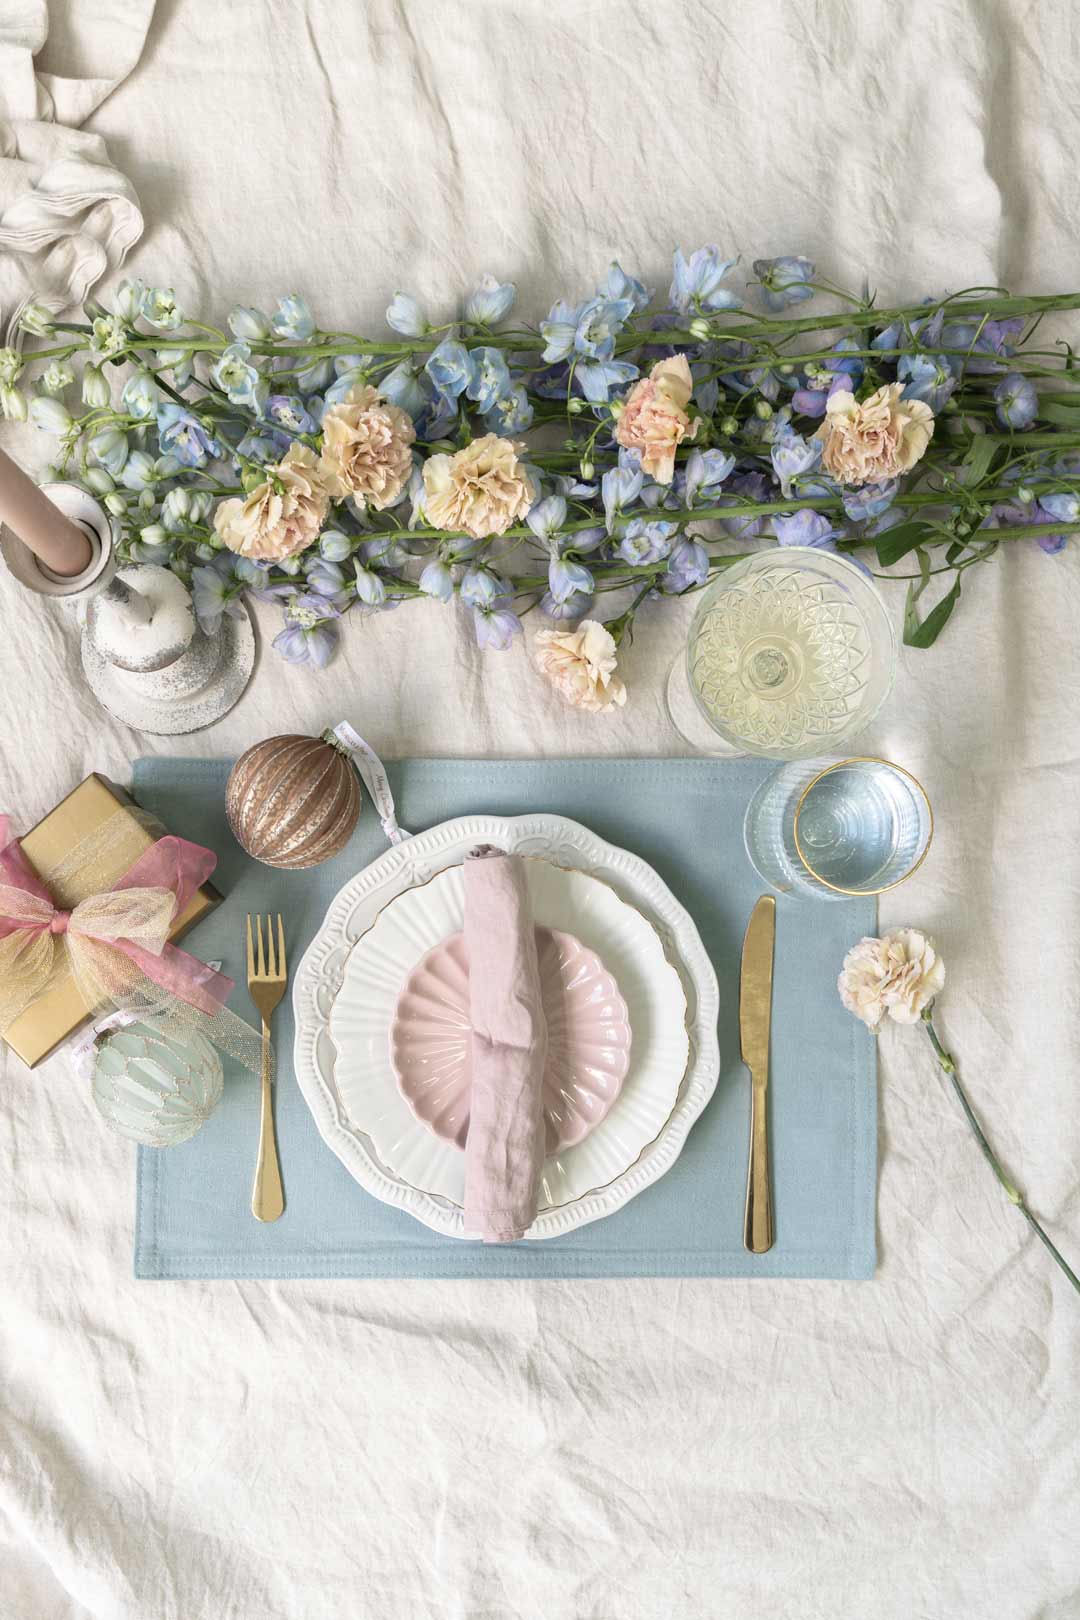 An elegant provincial style Christmas table setting with pastel colours like blue and pink with gold or brass accents and antique vintage charm